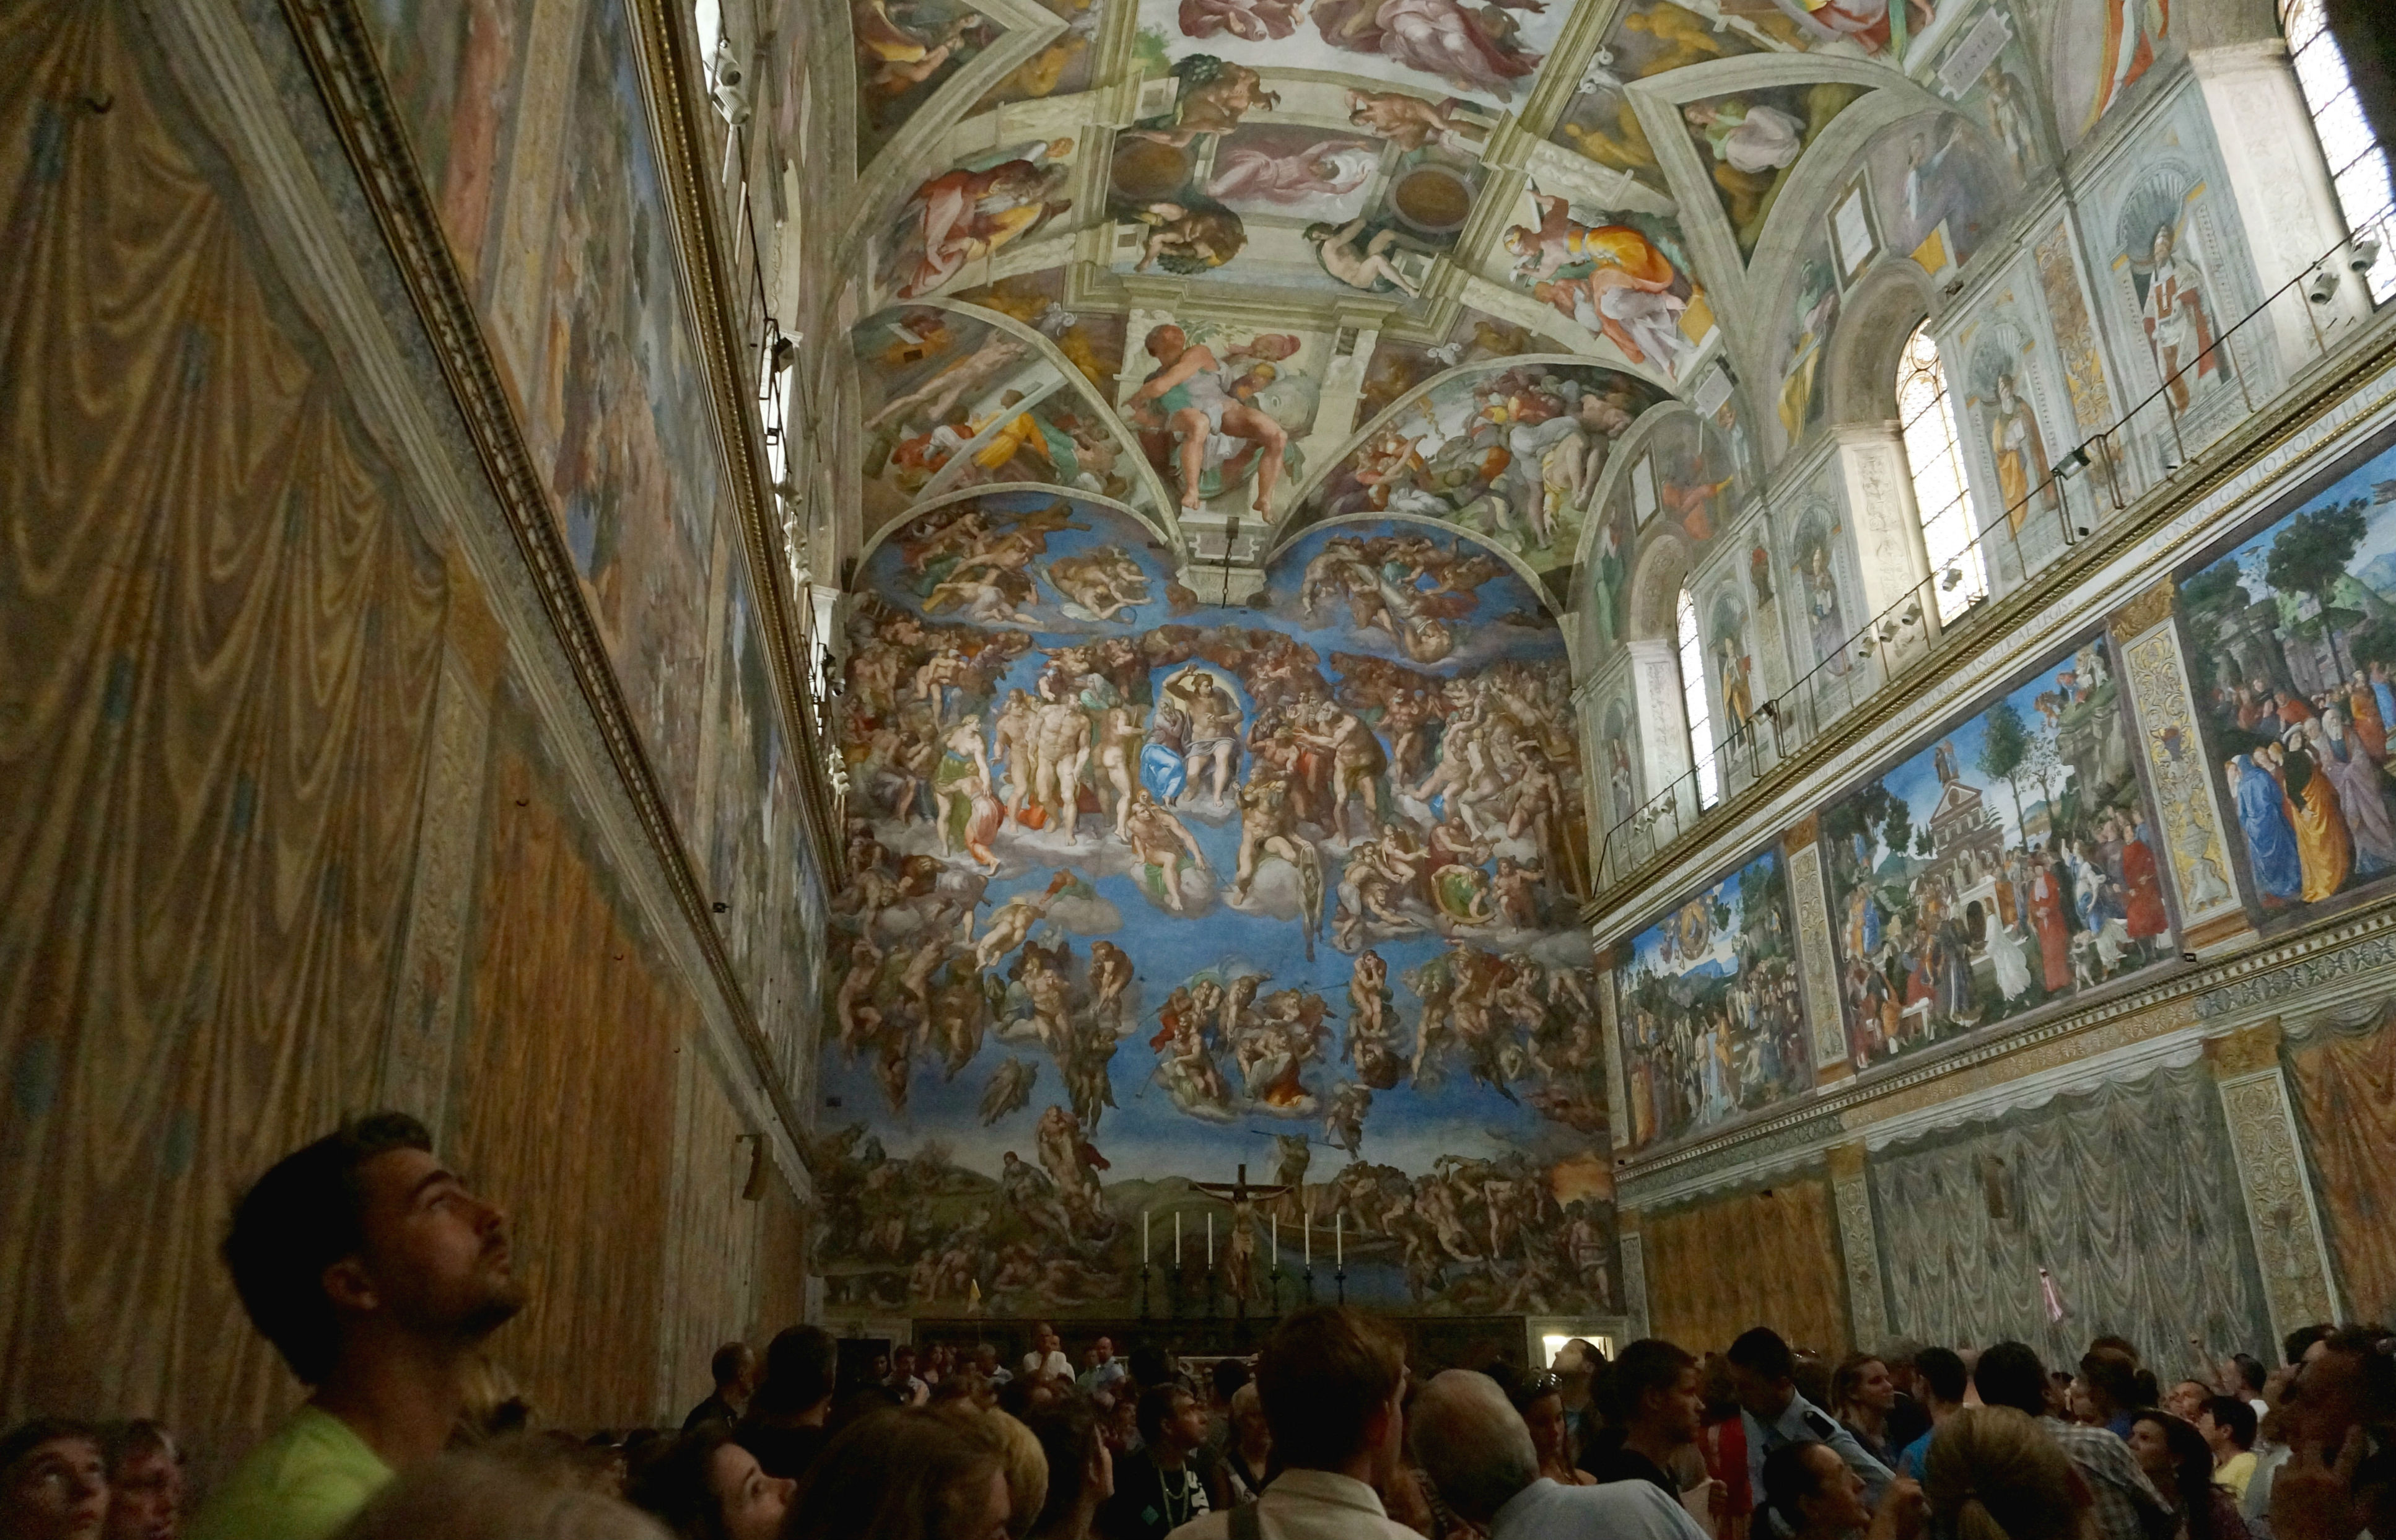 Blood donors to be rewarded with reduced price entry into the Vatican Museums